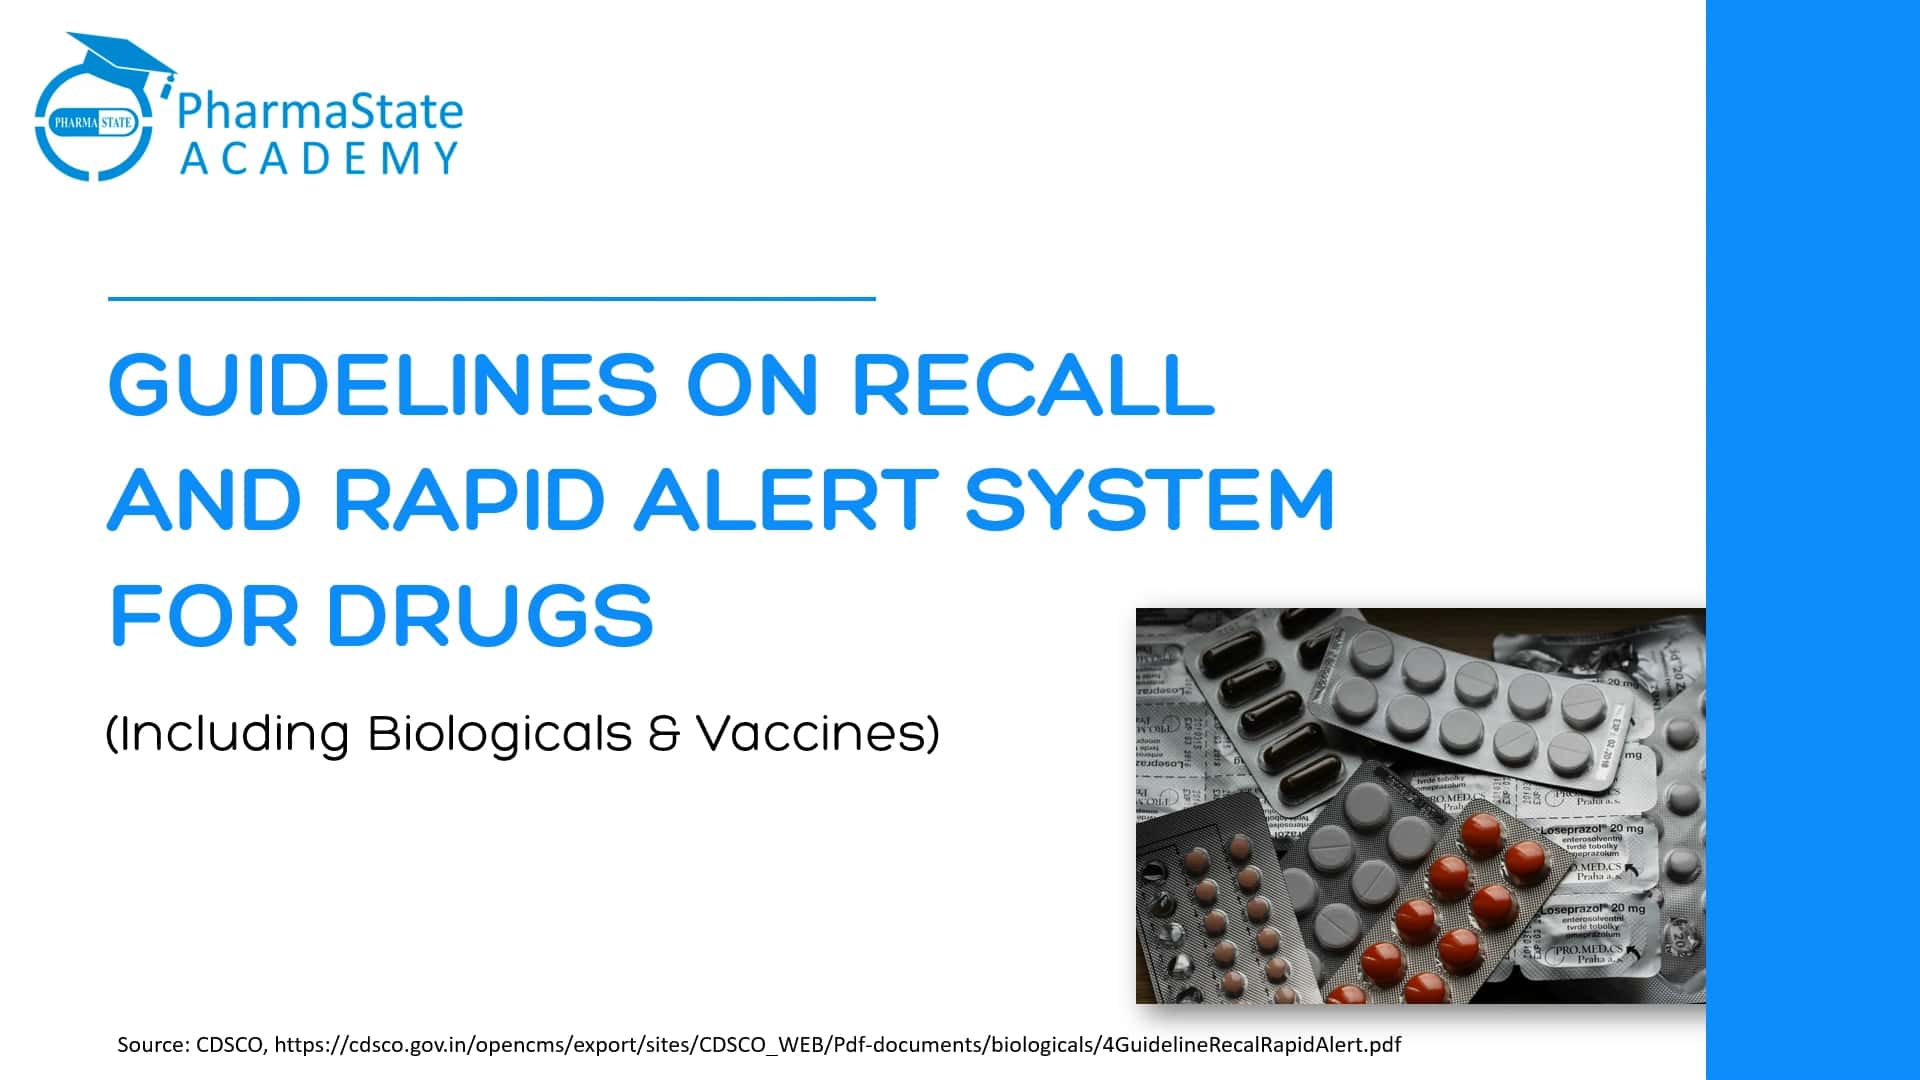 Guidelines on Recall and Rapid Alert System for Drugs